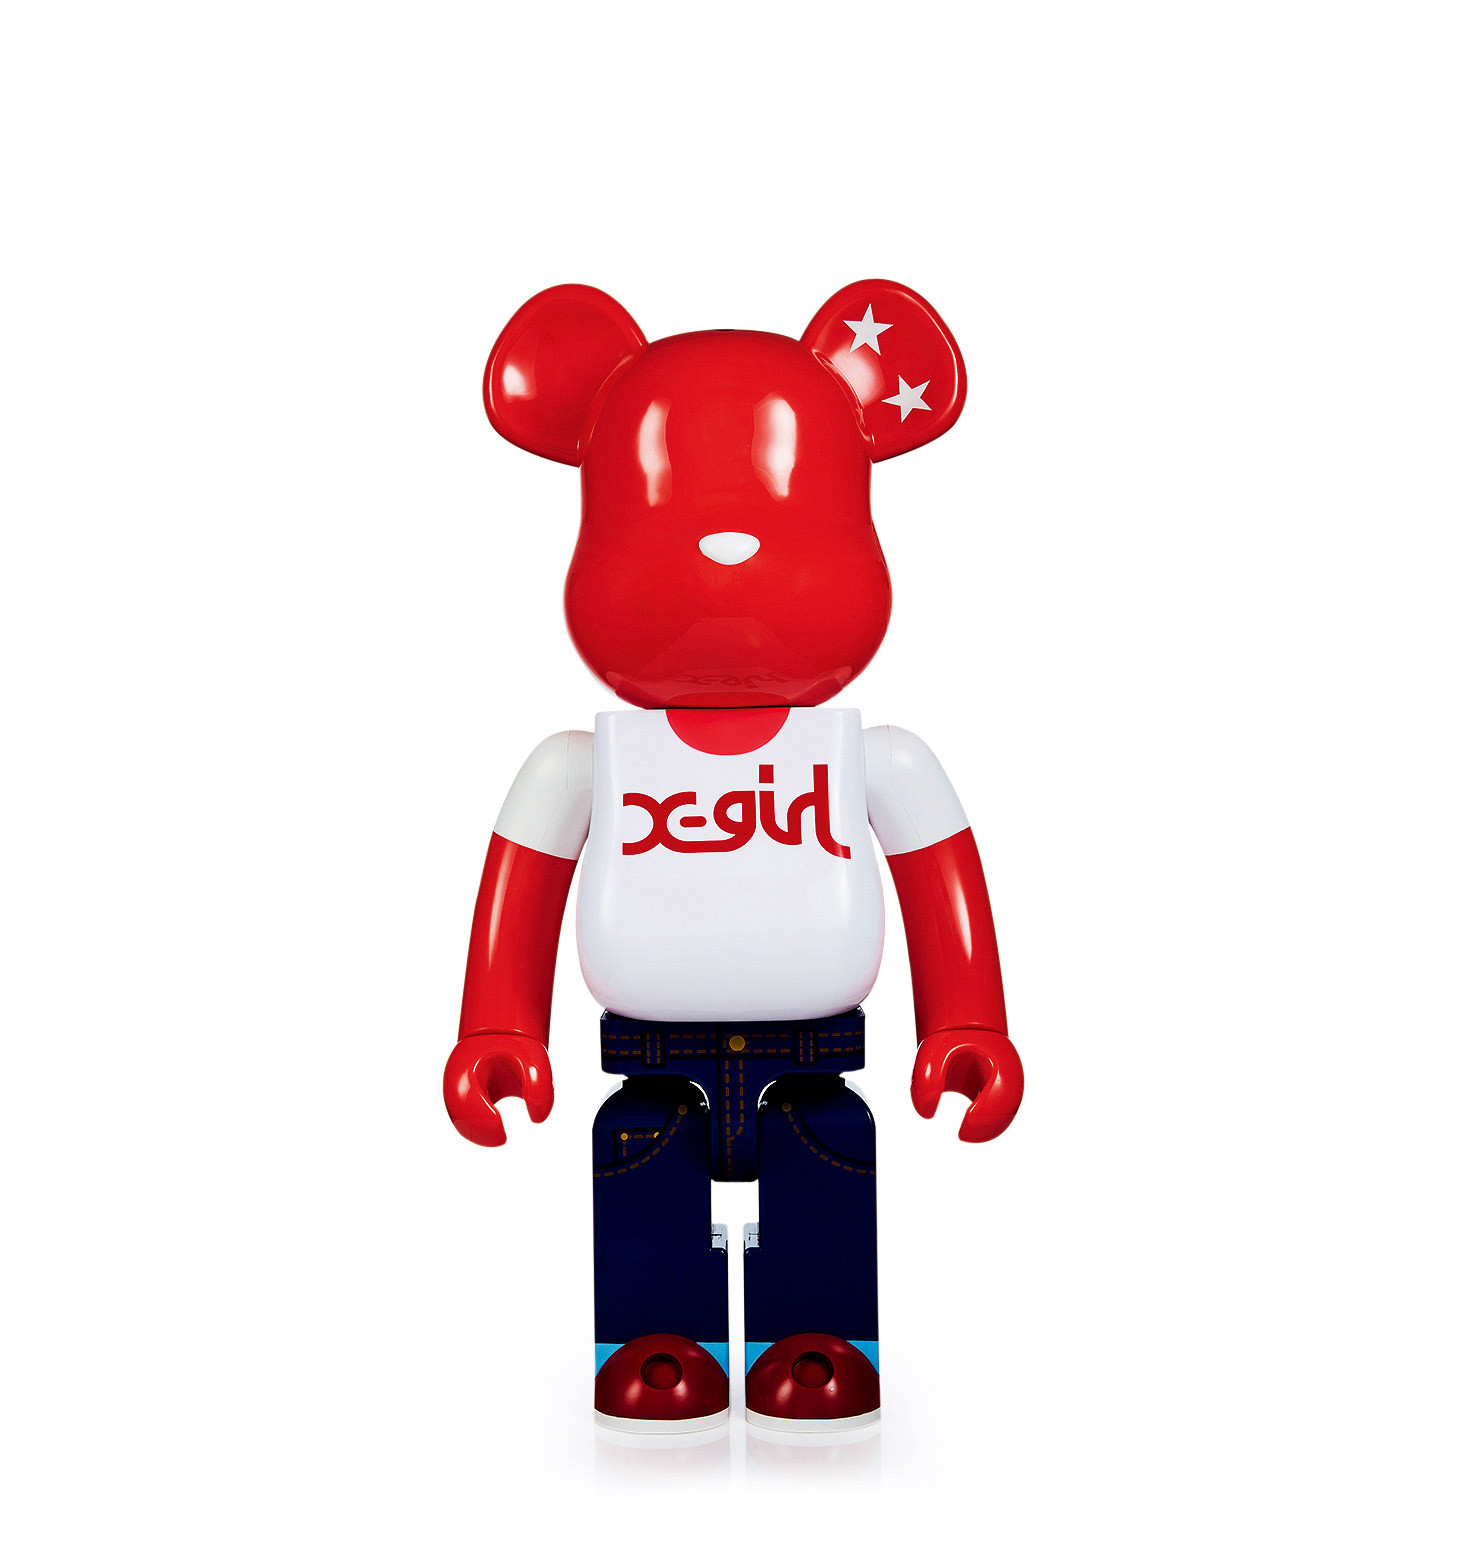 BEARBRICK X-GIRL 15TH ANNIVERSARY LIMITED EDITION 1000%